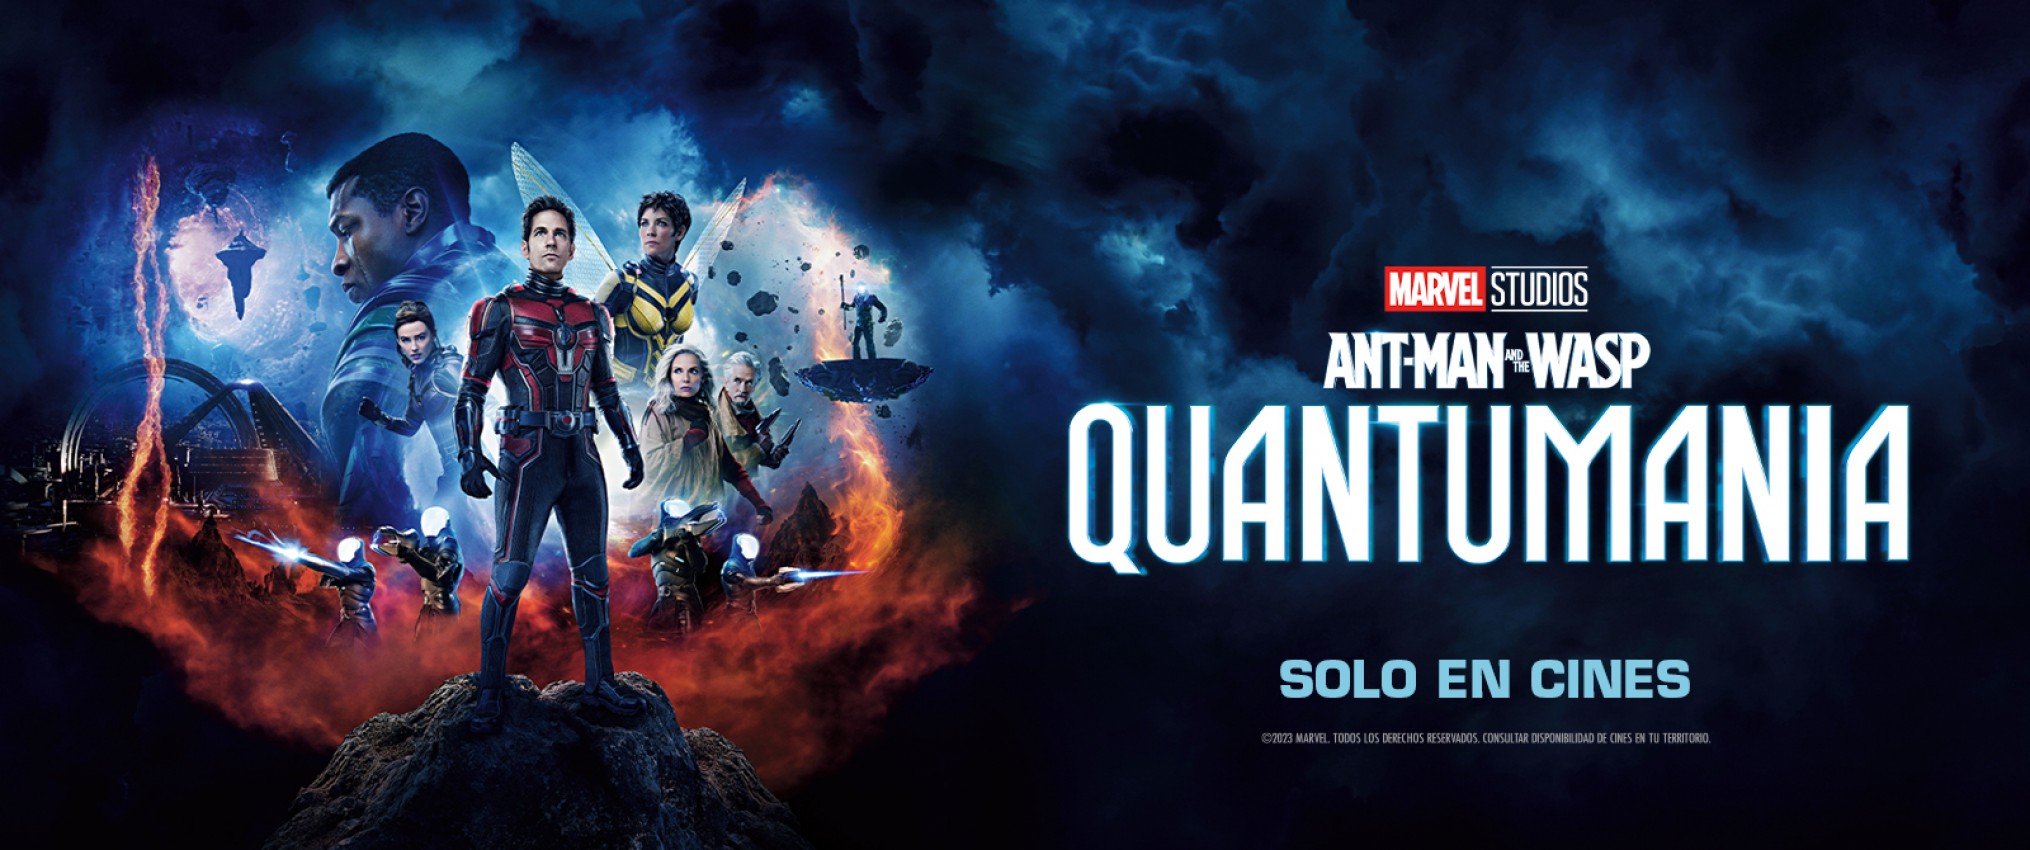 Ant-Man and The Wasp: QUANTUMANIA 